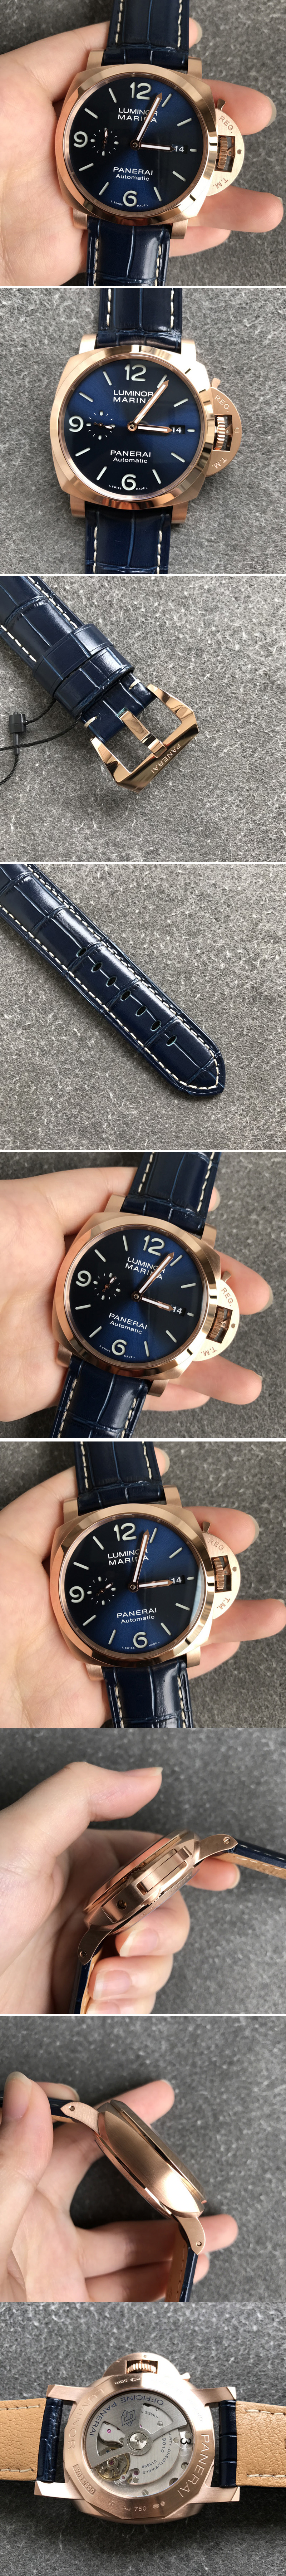 Replica Panerai PAM1112 V GMT RG VSF 1:1 Best Edition Blue Dial on Blue Leather Strap P.9010 Super Clone